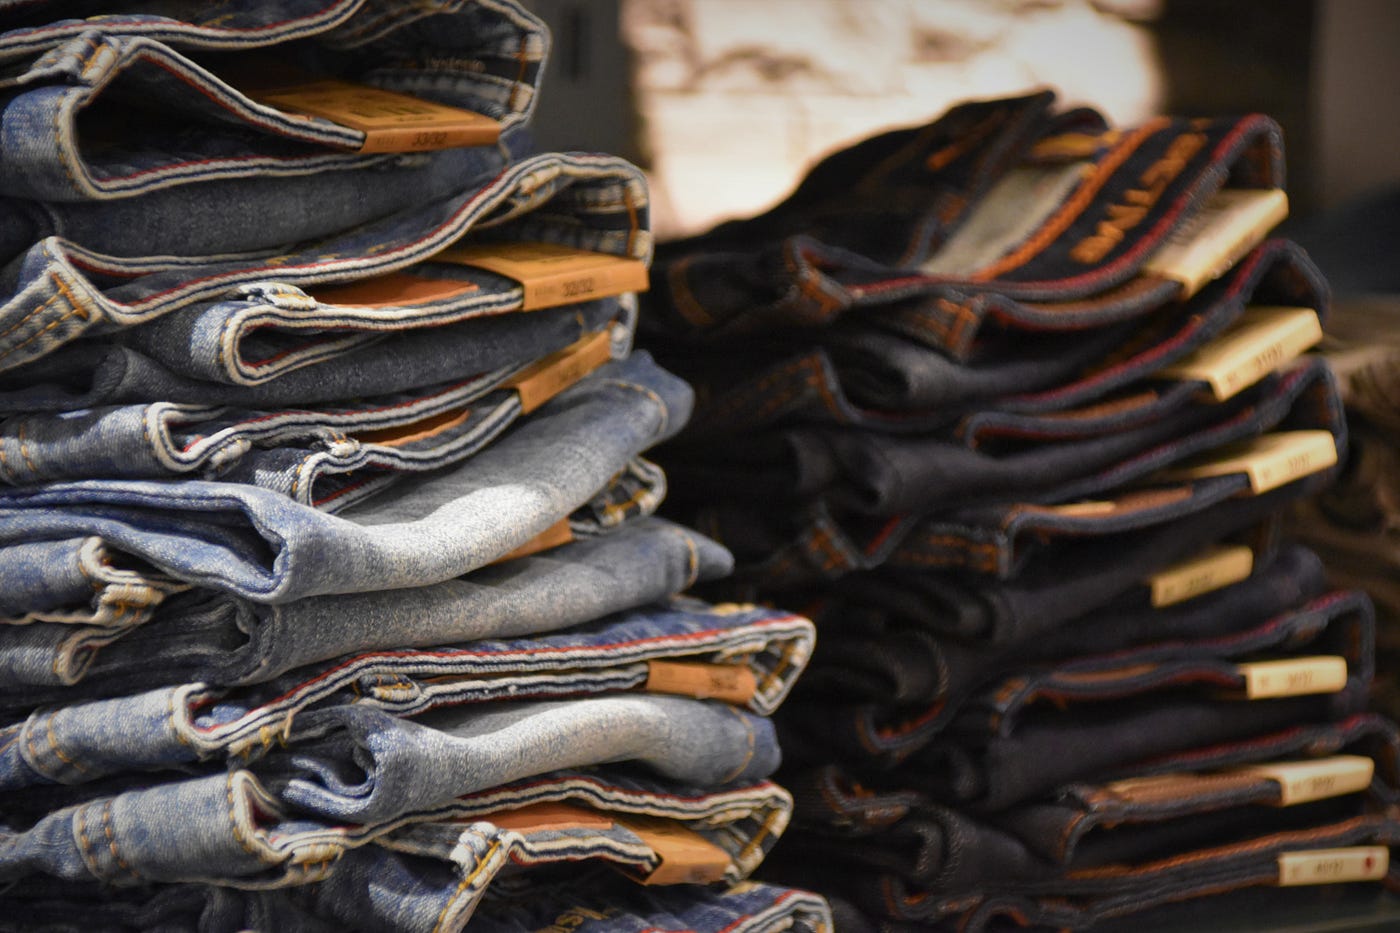 If I Only Owned One Pair of Pants Here's What I'd Get | by Burk |  ILLUMINATION | Medium